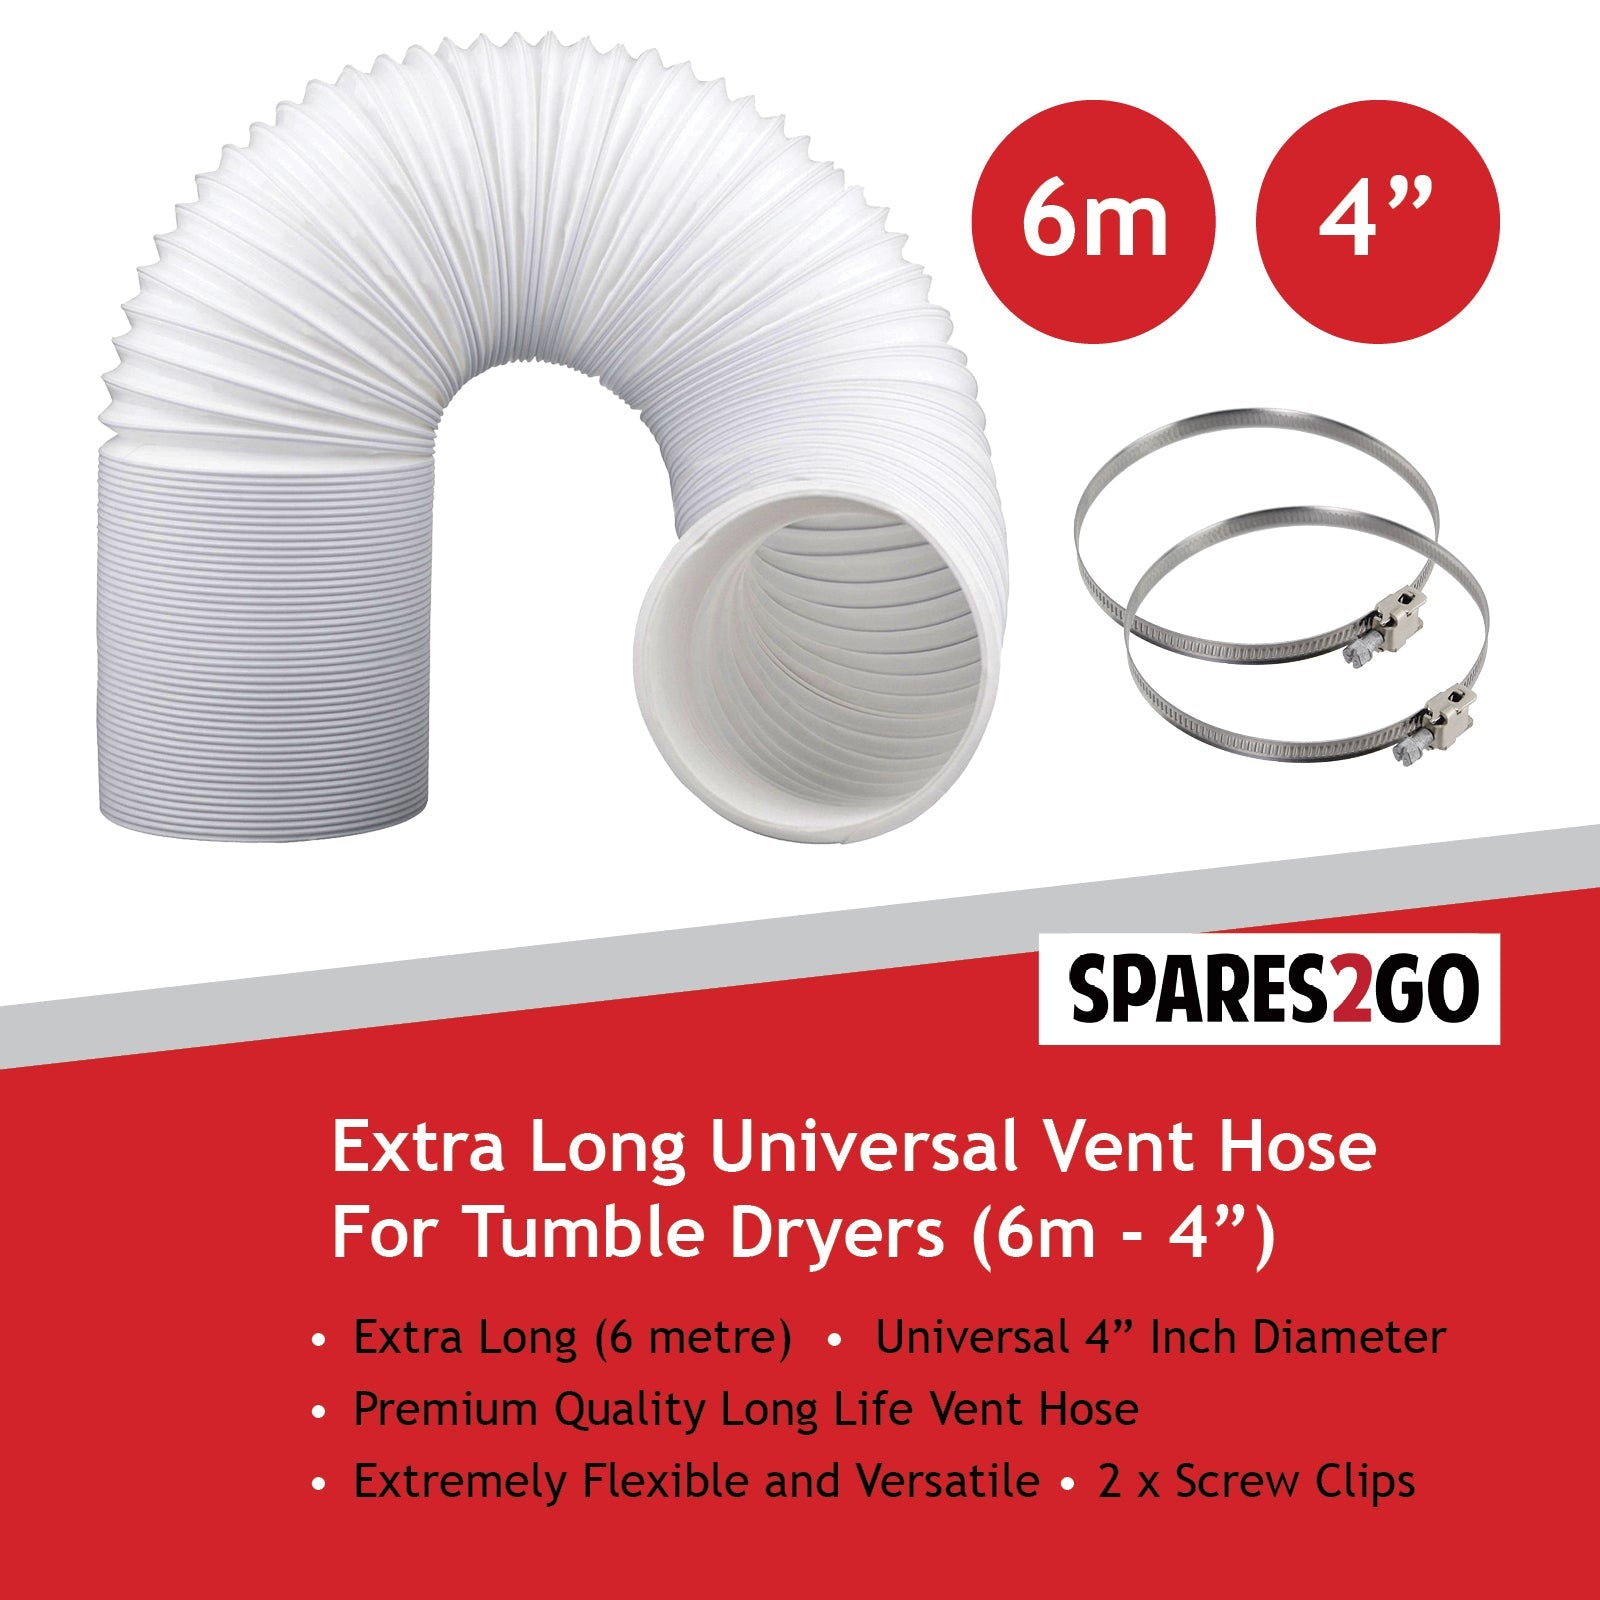 Vent Hose Condenser Adaptor Kit for Crosslee White Knight Tumble Dryer (Extra Long 6m / 4")